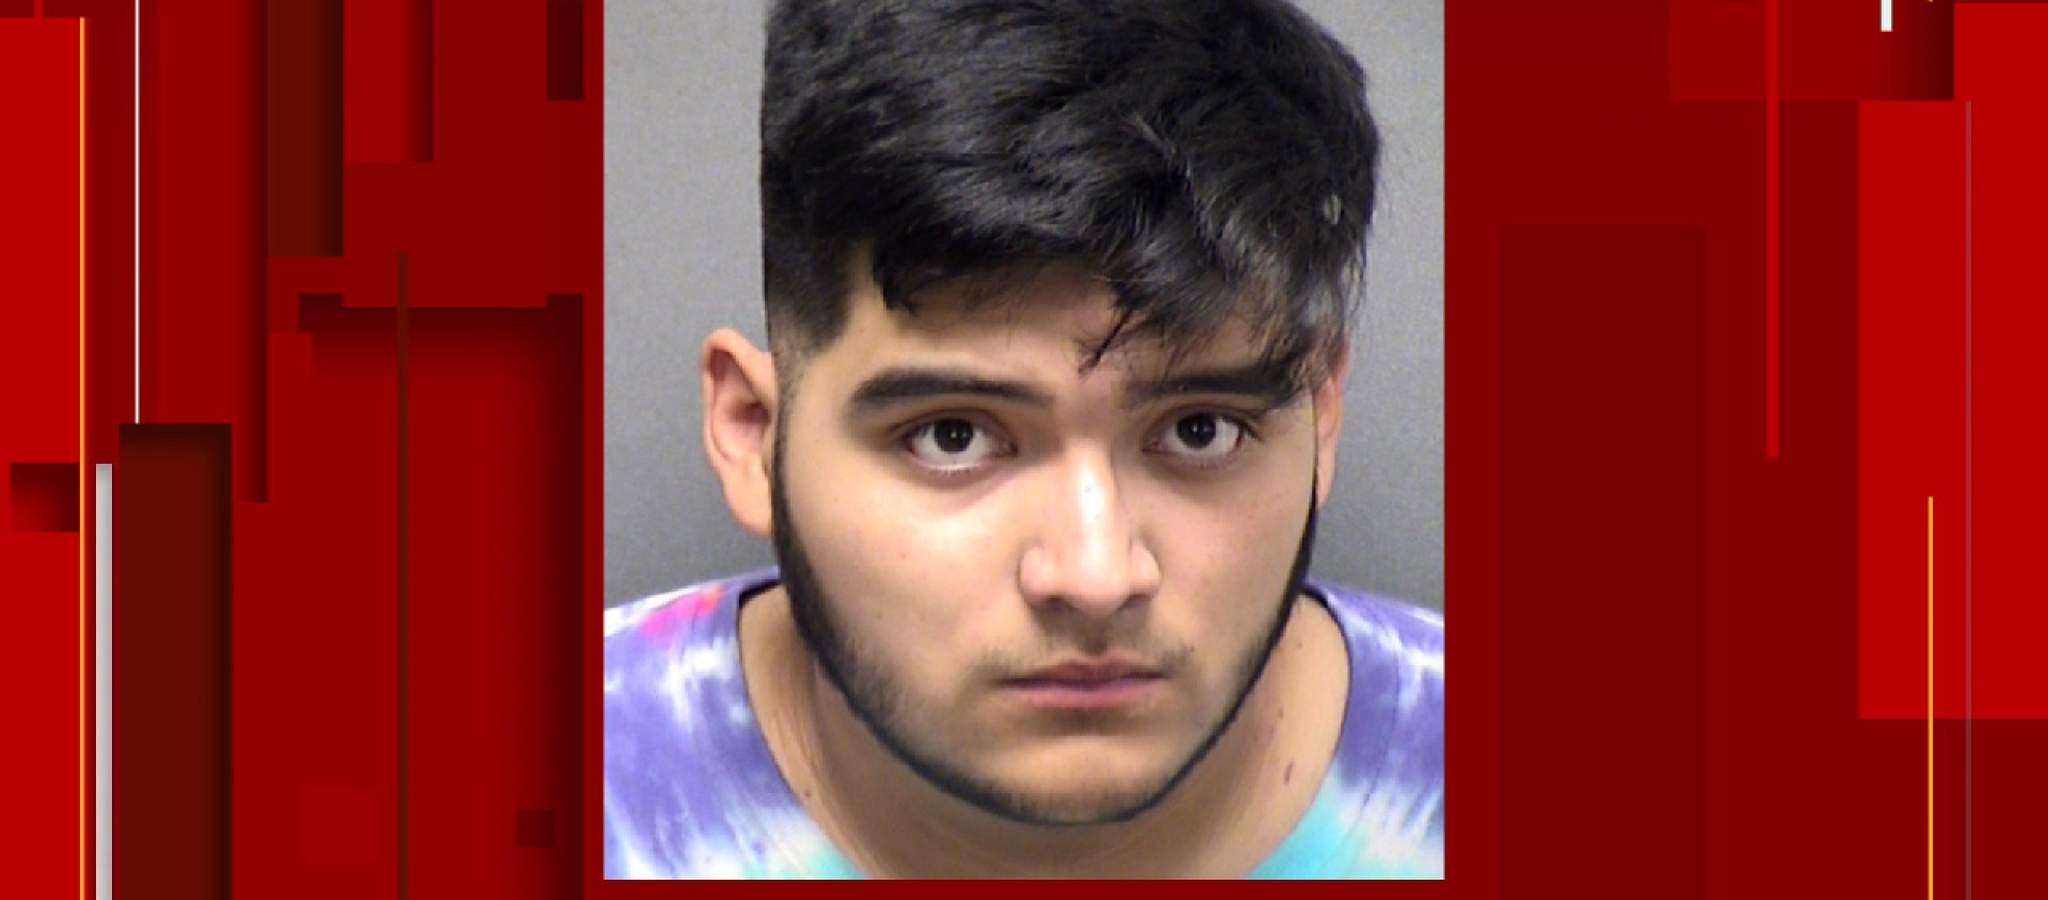 19-year-old man facing murder charge for fatal crash after BCSO chase, officials say